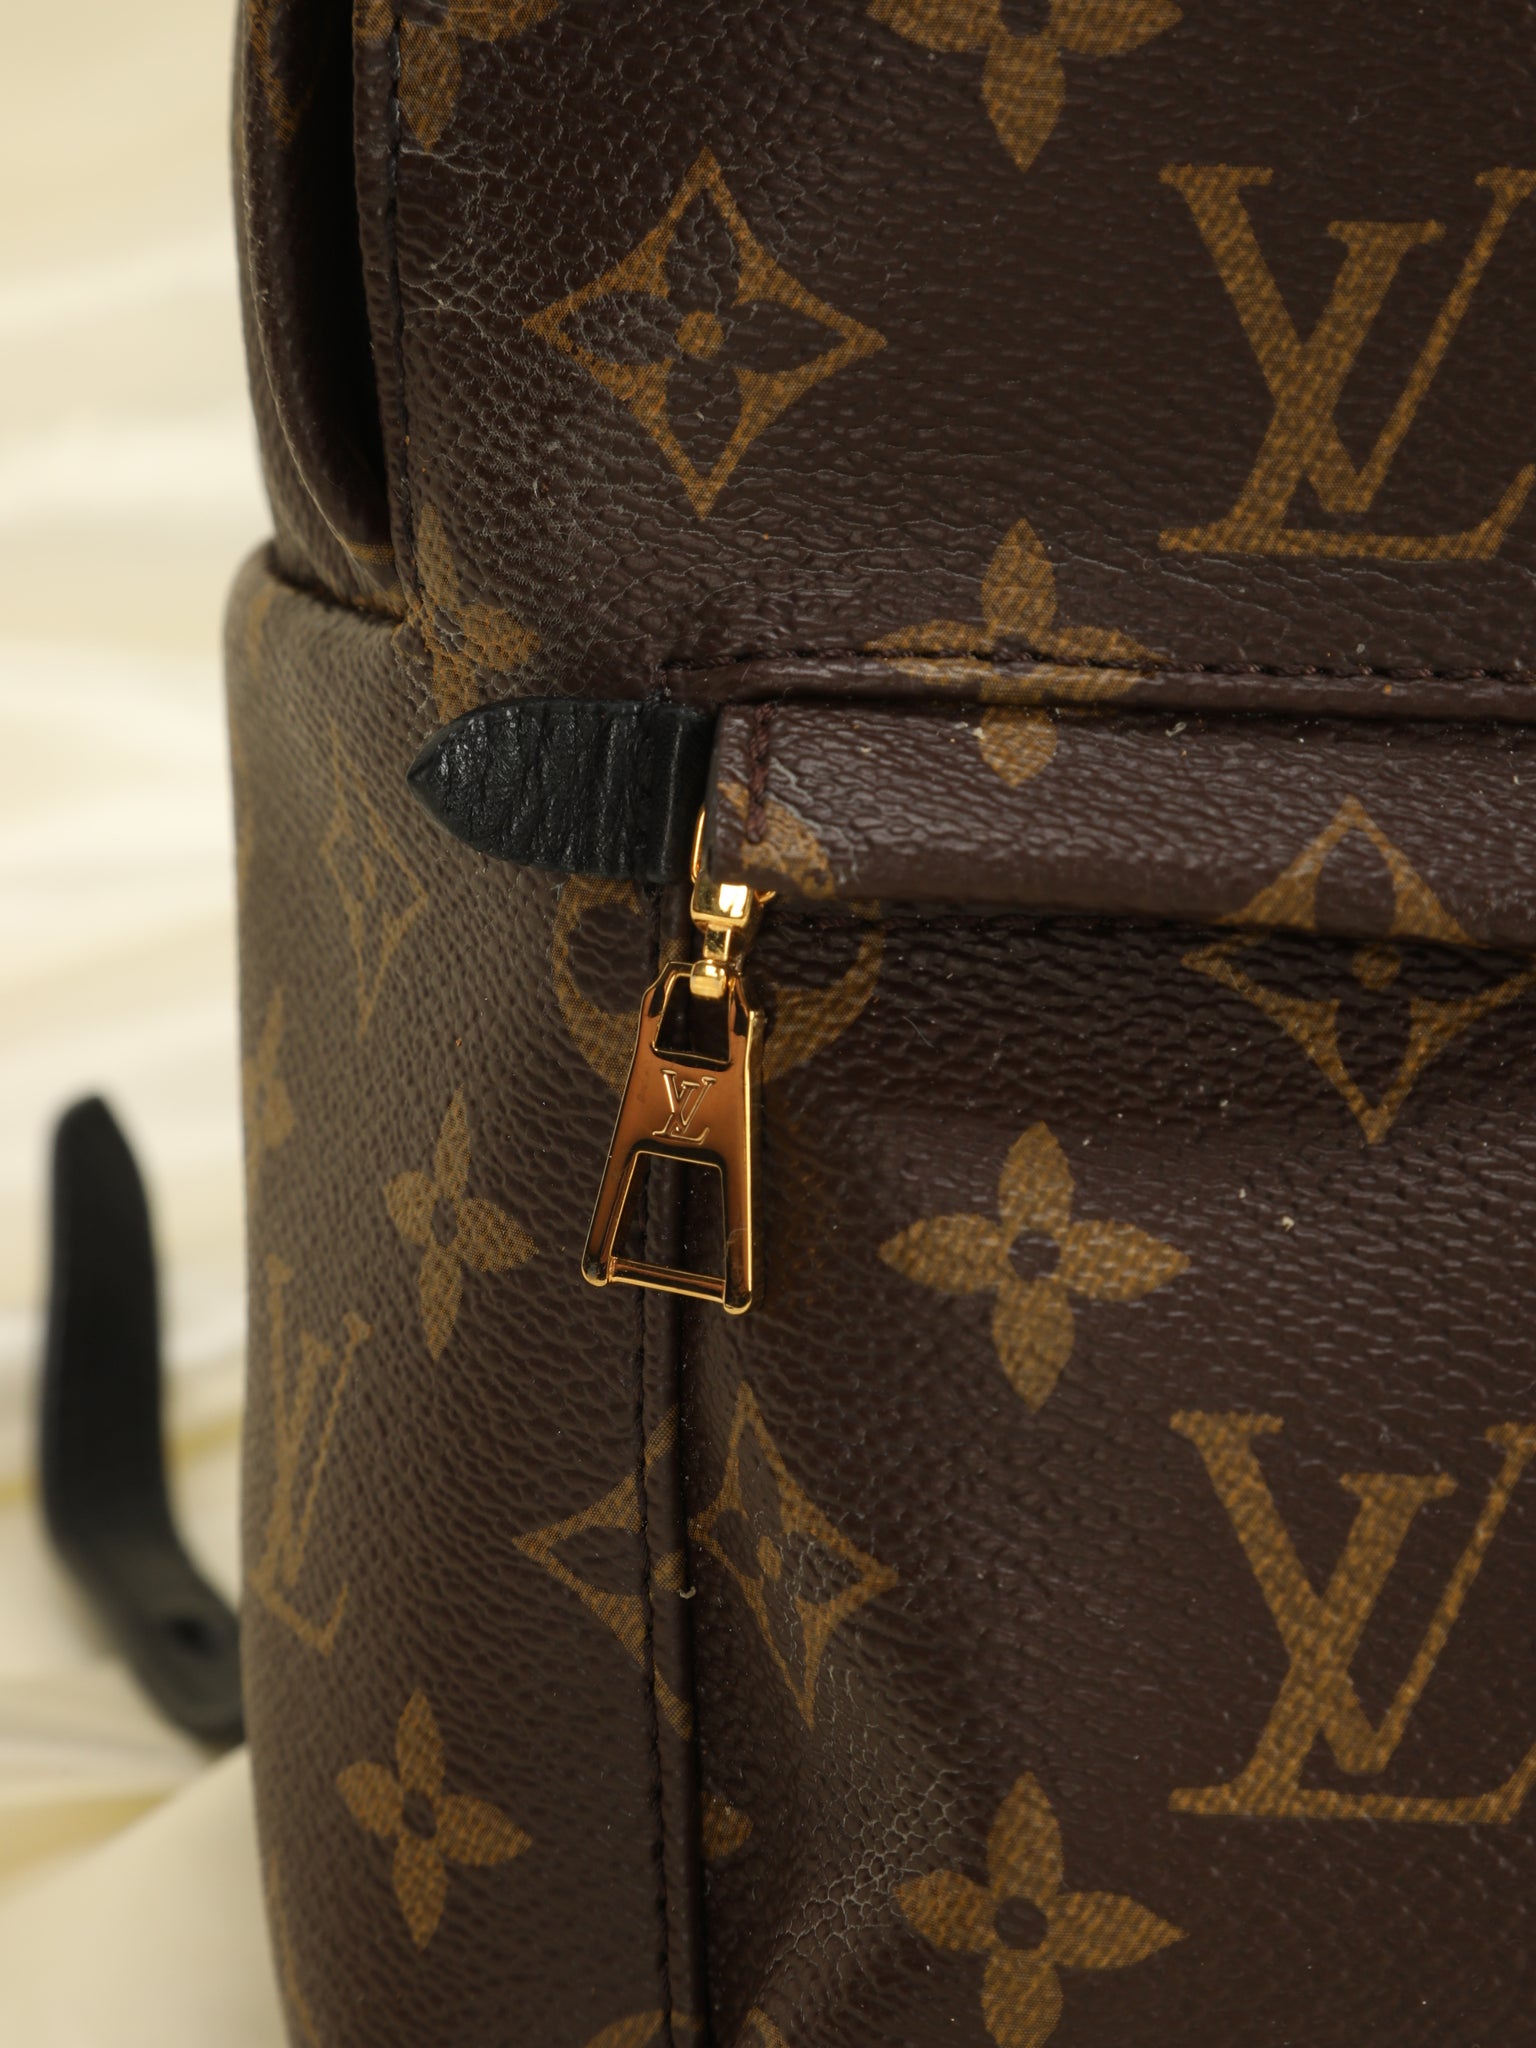 LV Palm Spring backpack PM MM GM 💐💐💐💐💐